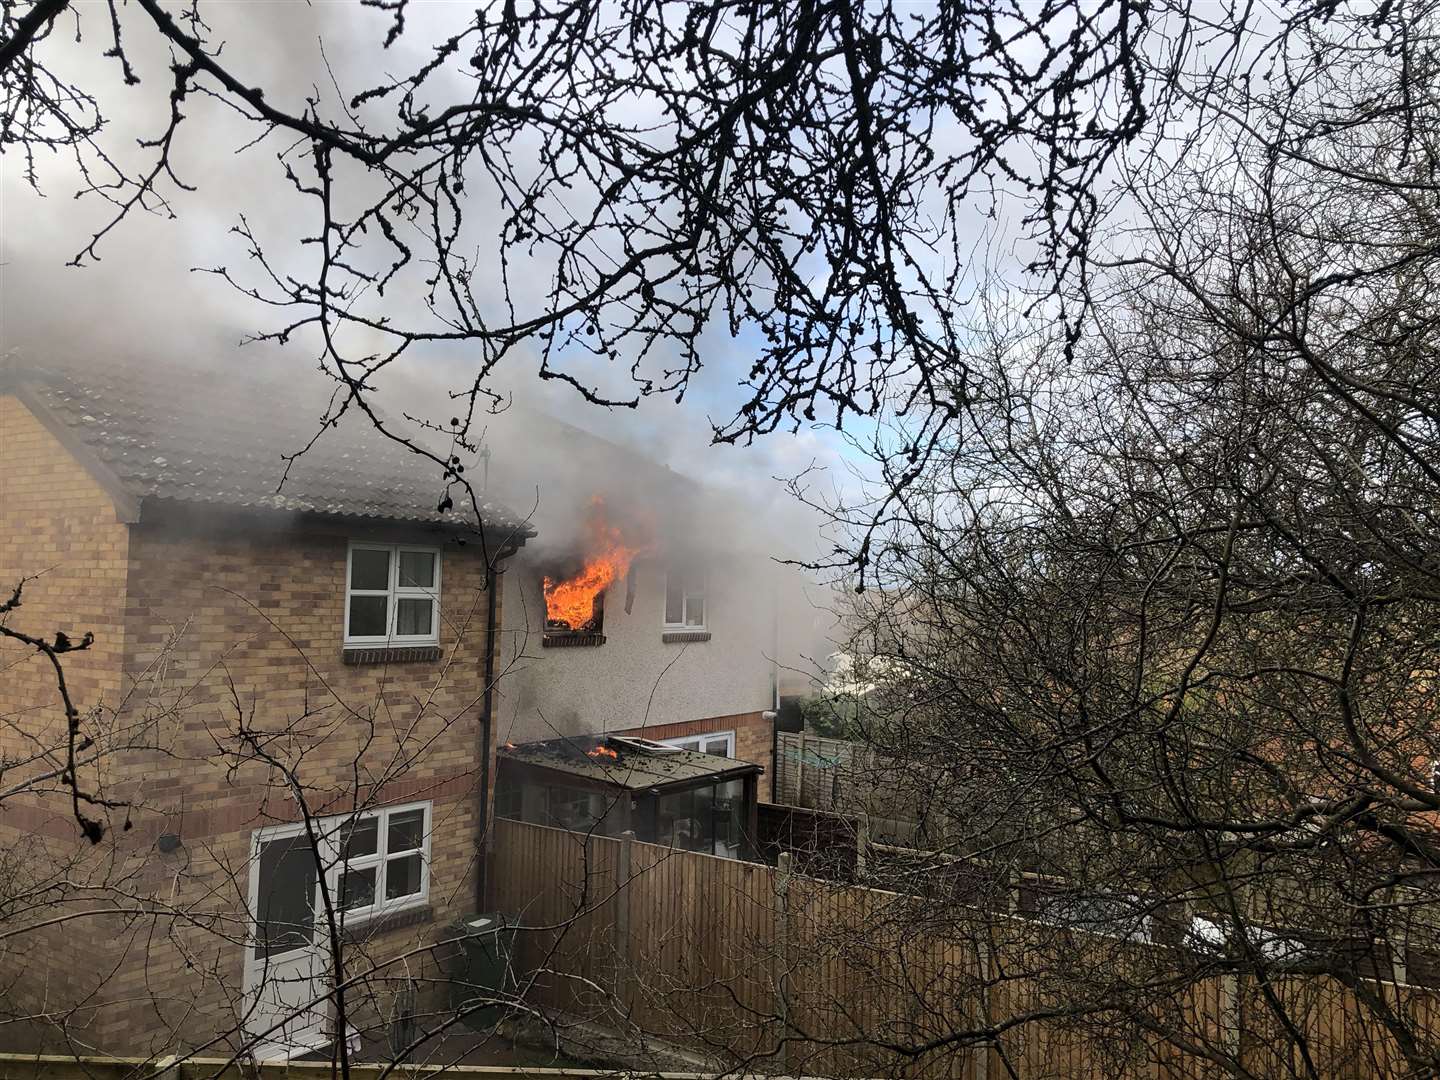 Firefighters tackled a blaze at a house in Downswood on Sunday (6793630)